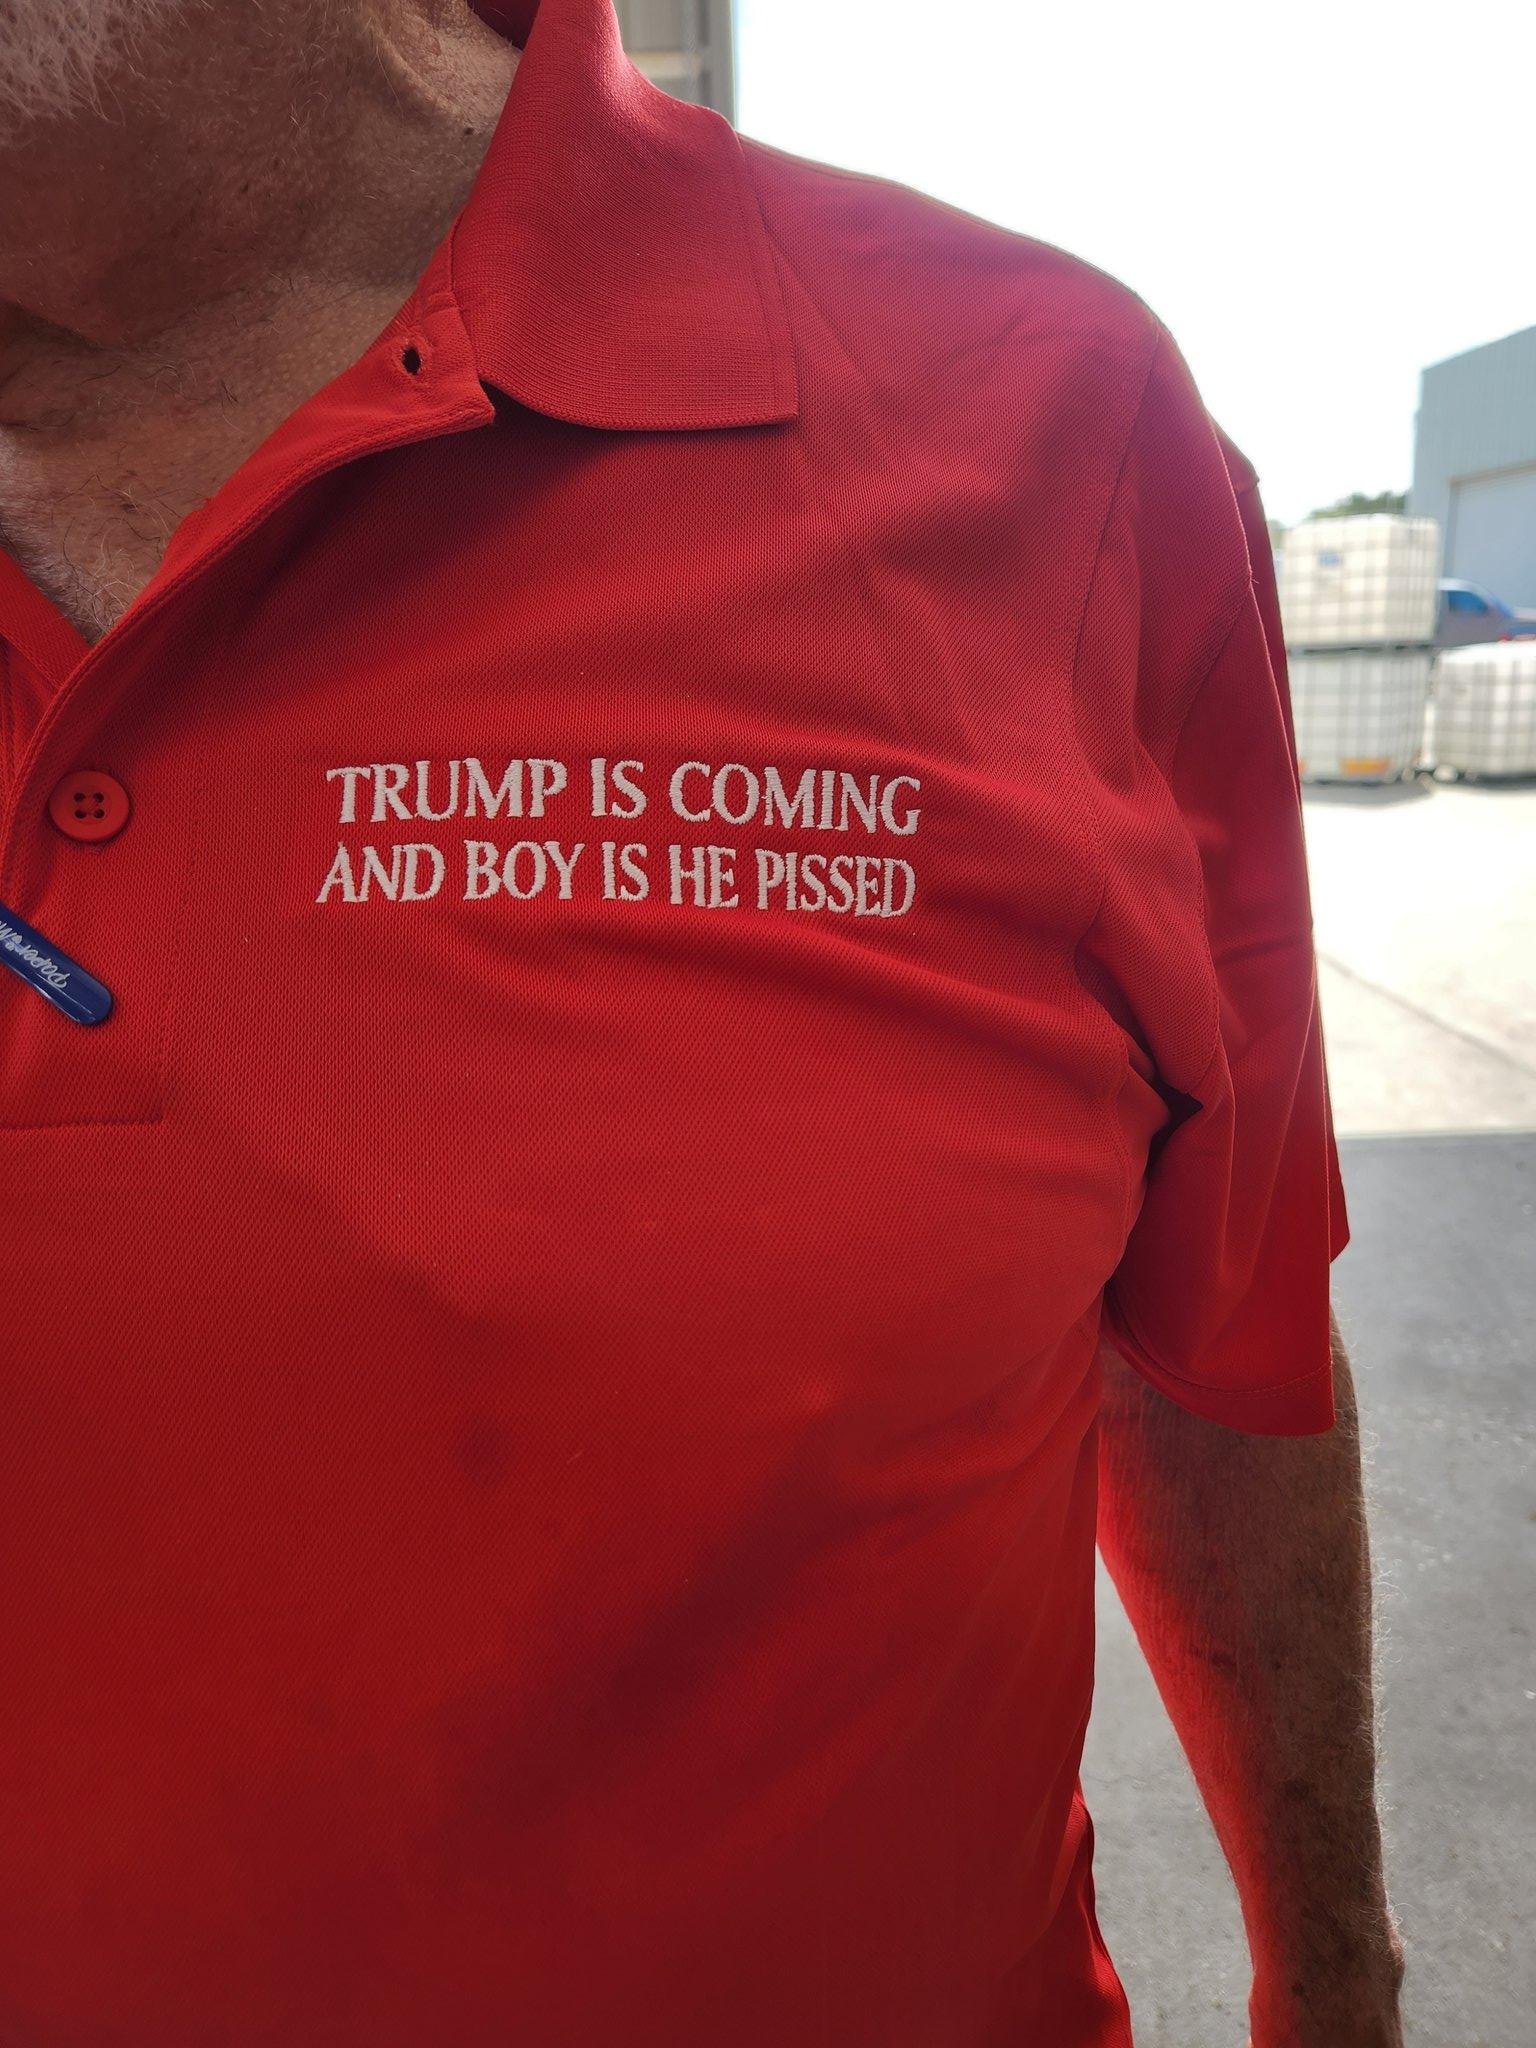 New Trump Shirt spotted in the Wild – The Donald – America First